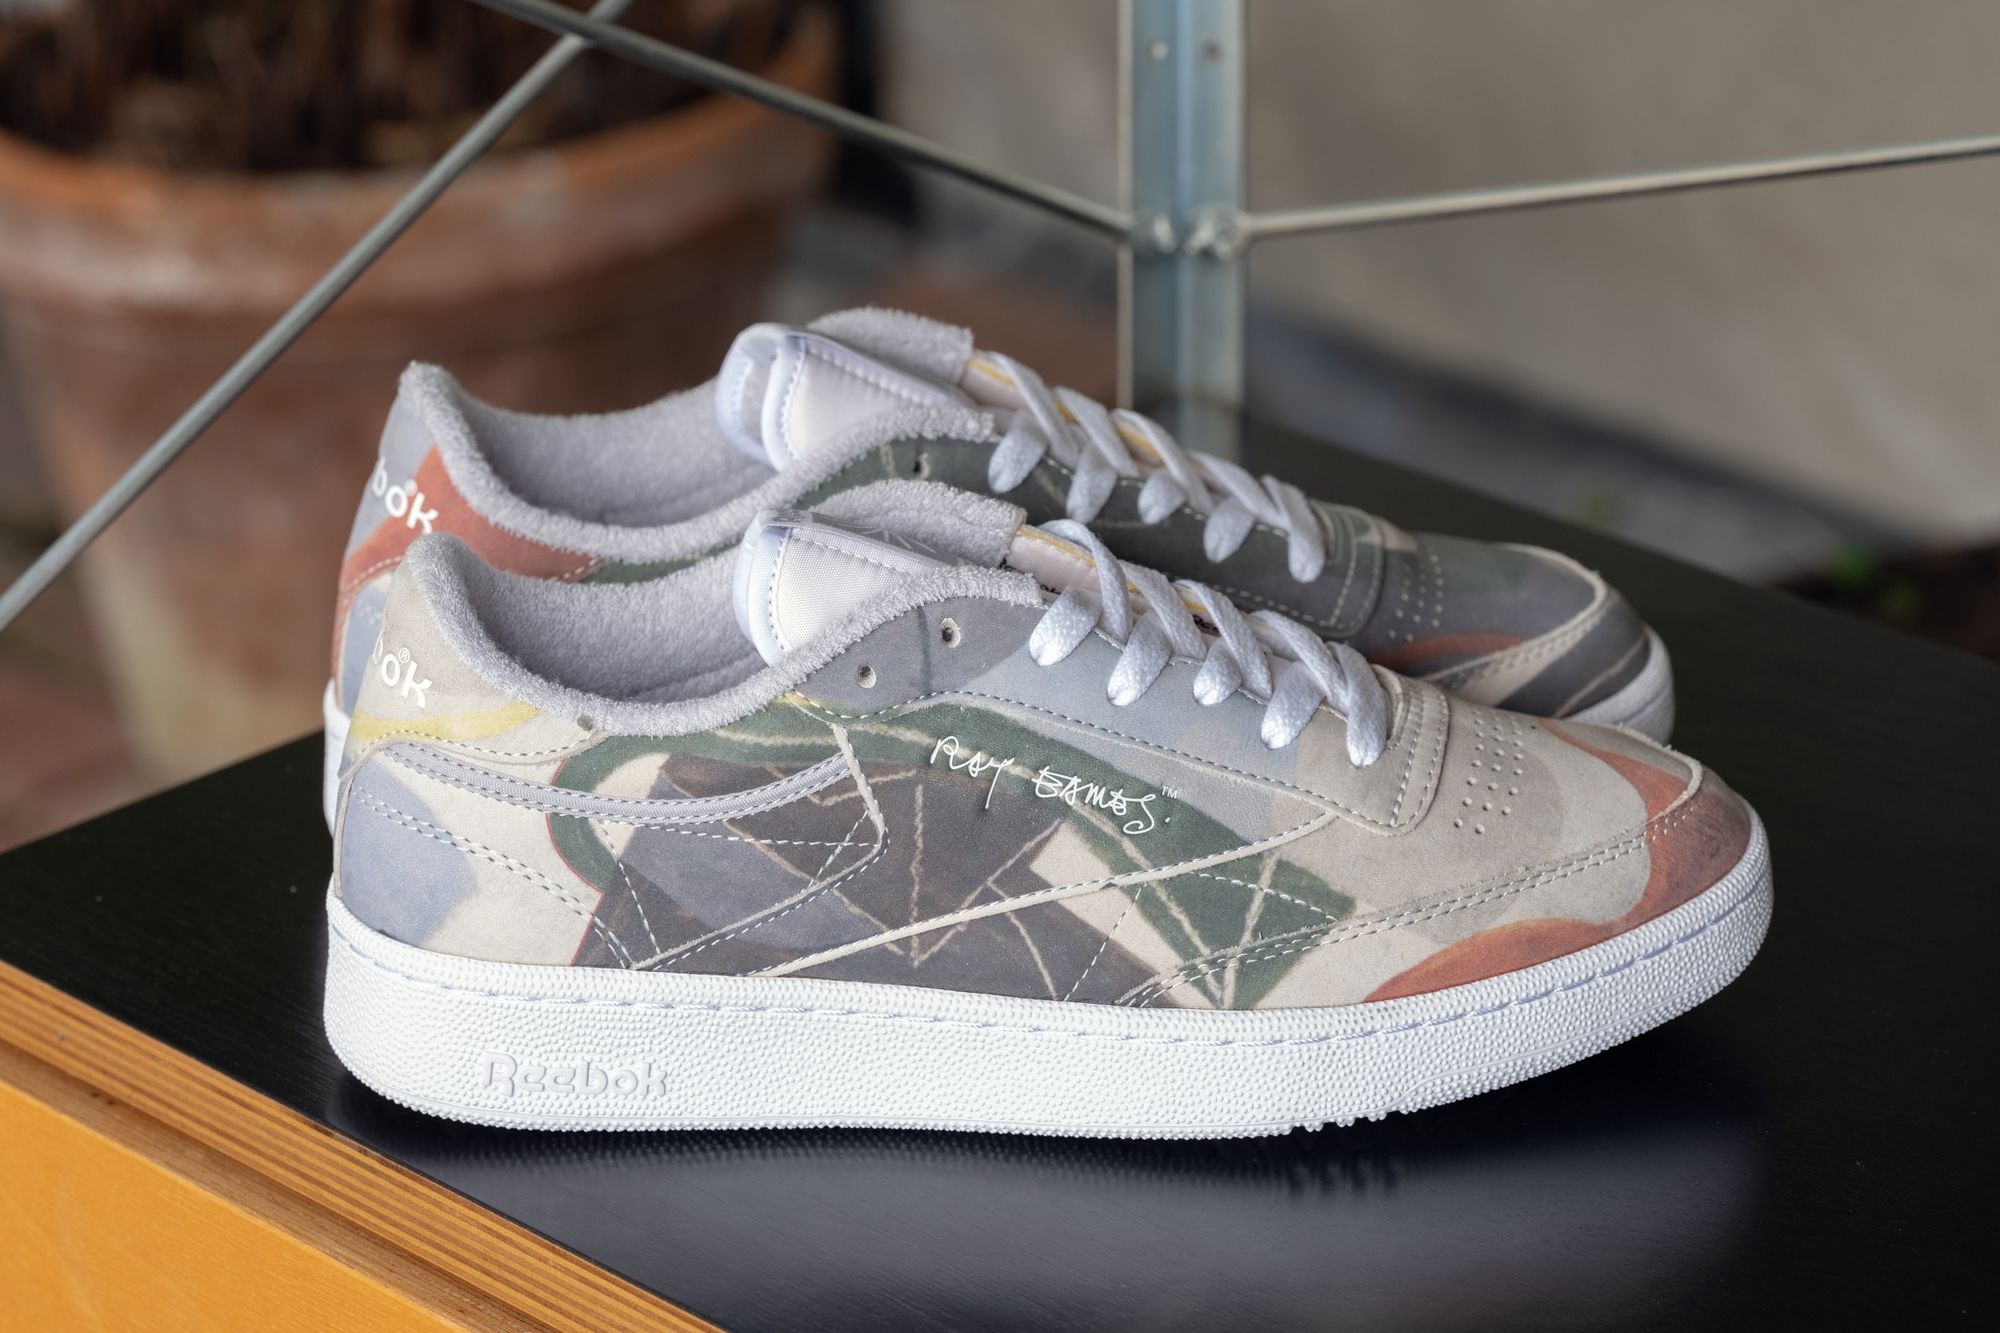 Reebok: Eames Club C 85 Shoes, A Ray Eames composition painting from 1939, Heritage court-inspired shoes. 2000x1340 HD Wallpaper.